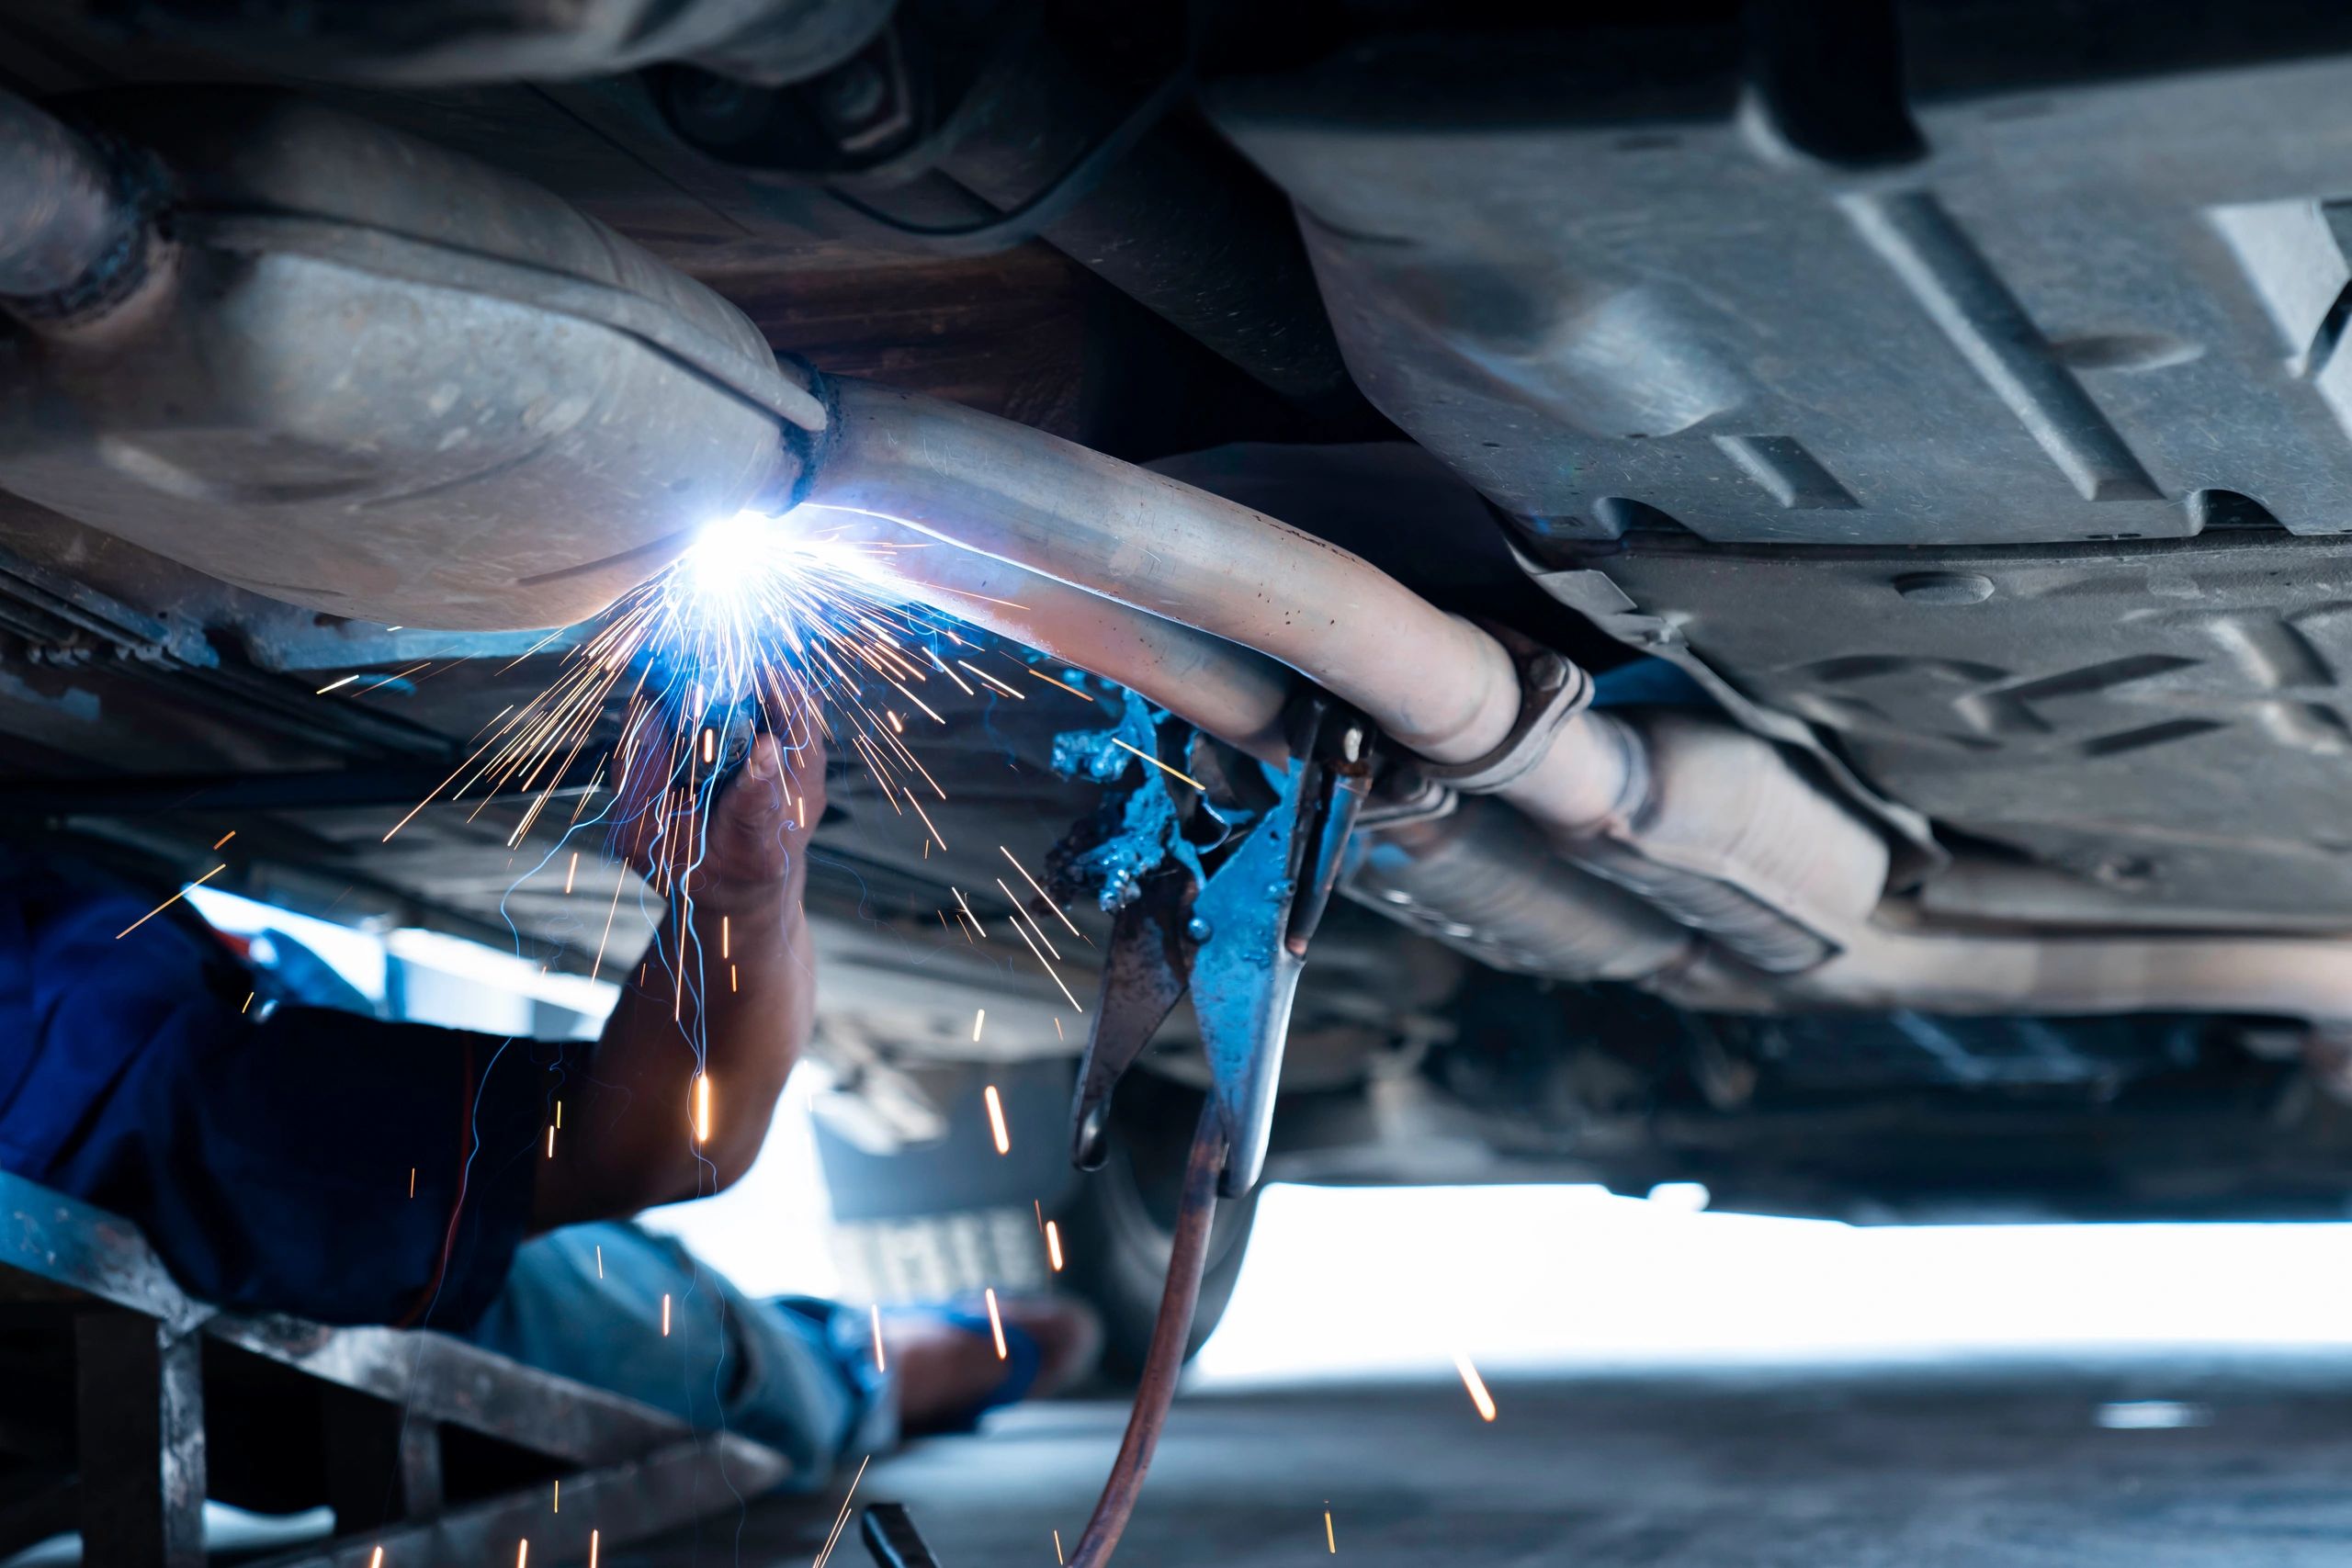 Muffler Exhaust and Emission Repair at Autotexs. 